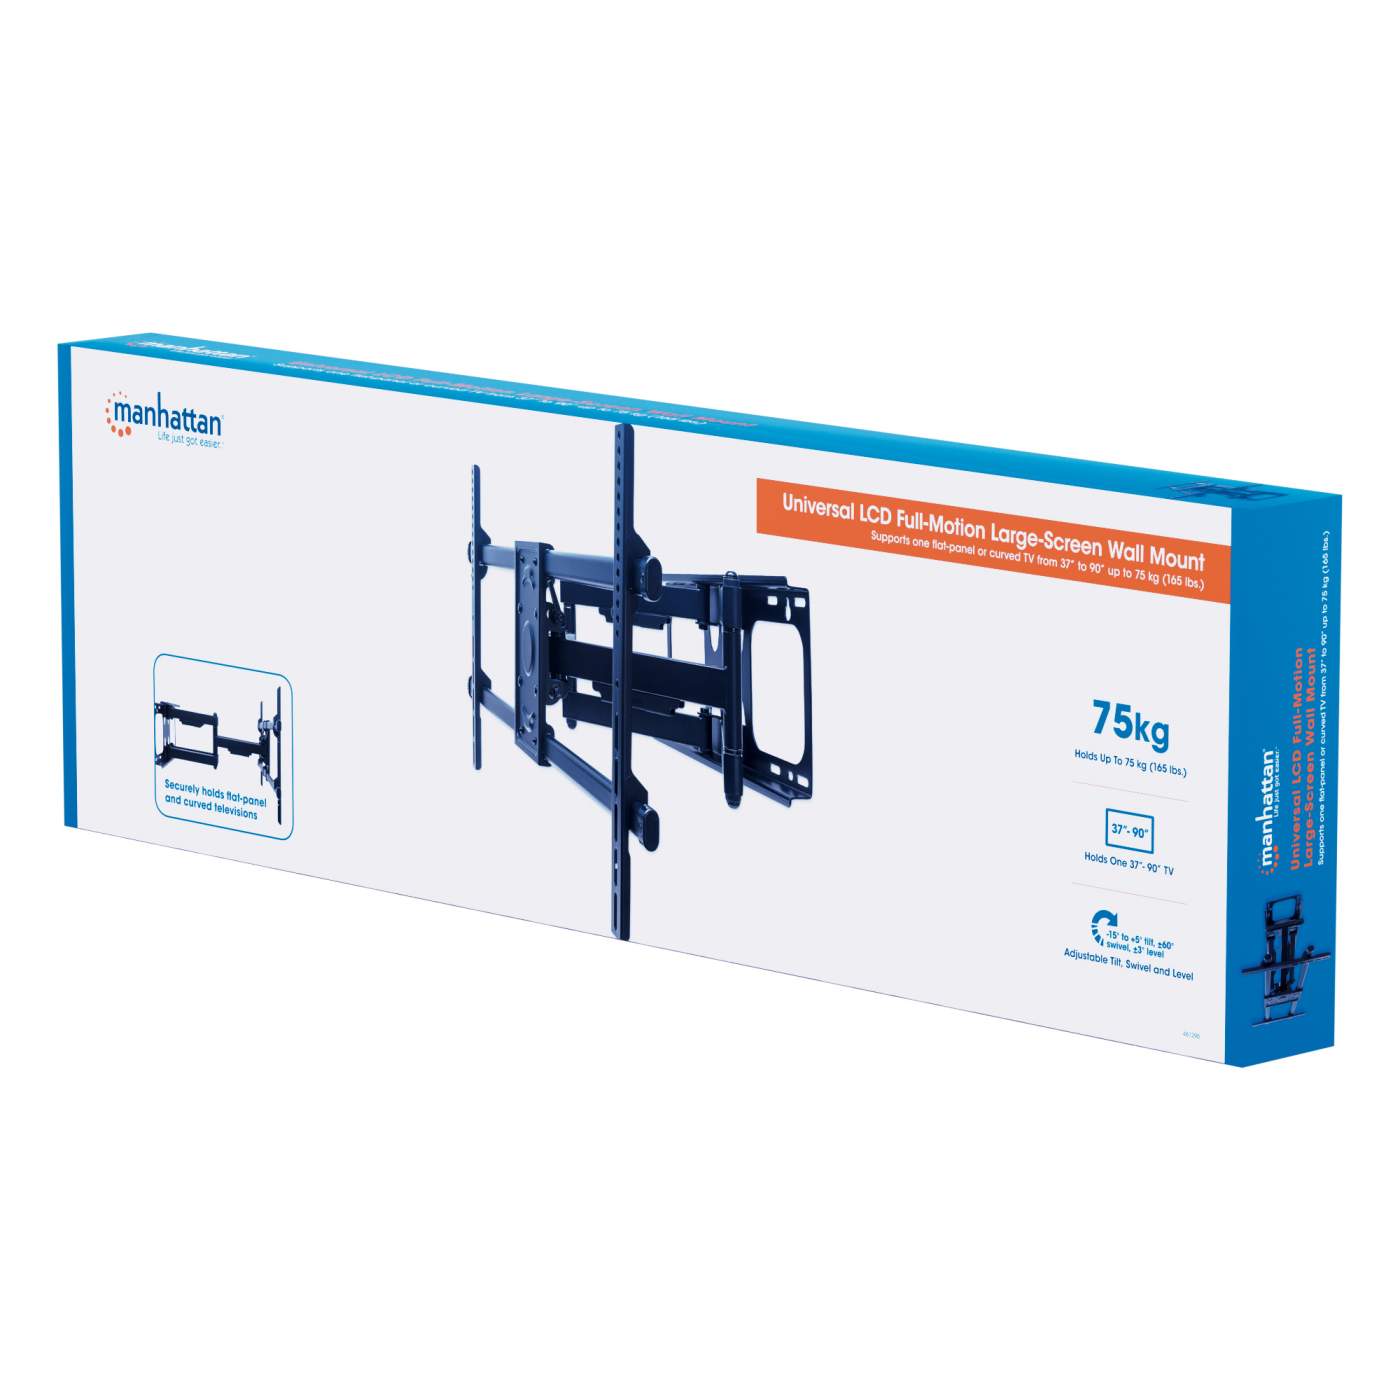 Universal LCD Full-Motion Large-Screen Wall Mount Packaging Image 2